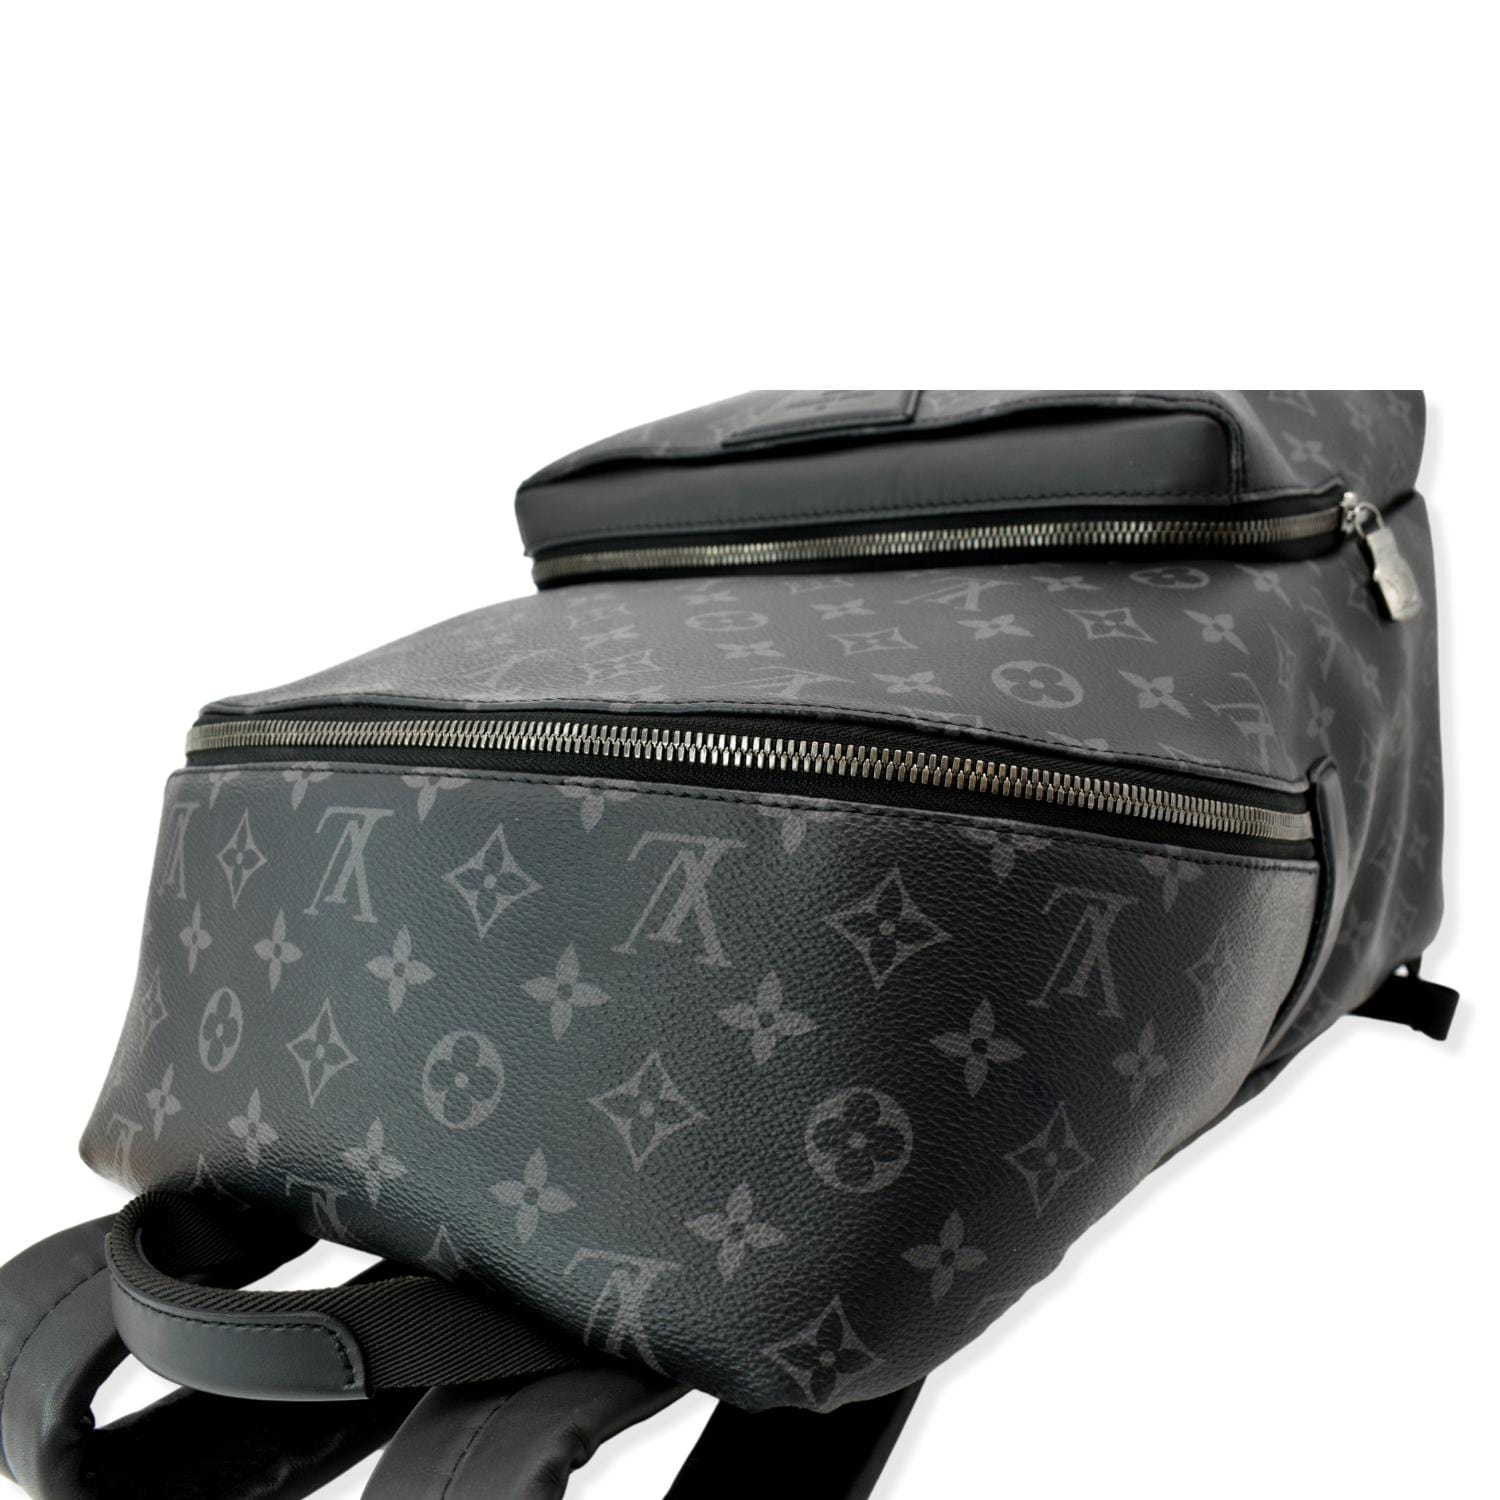 Louis Vuitton Monogram Eclipse Discovery Backpack - Black Backpacks, Bags -  LOU739134